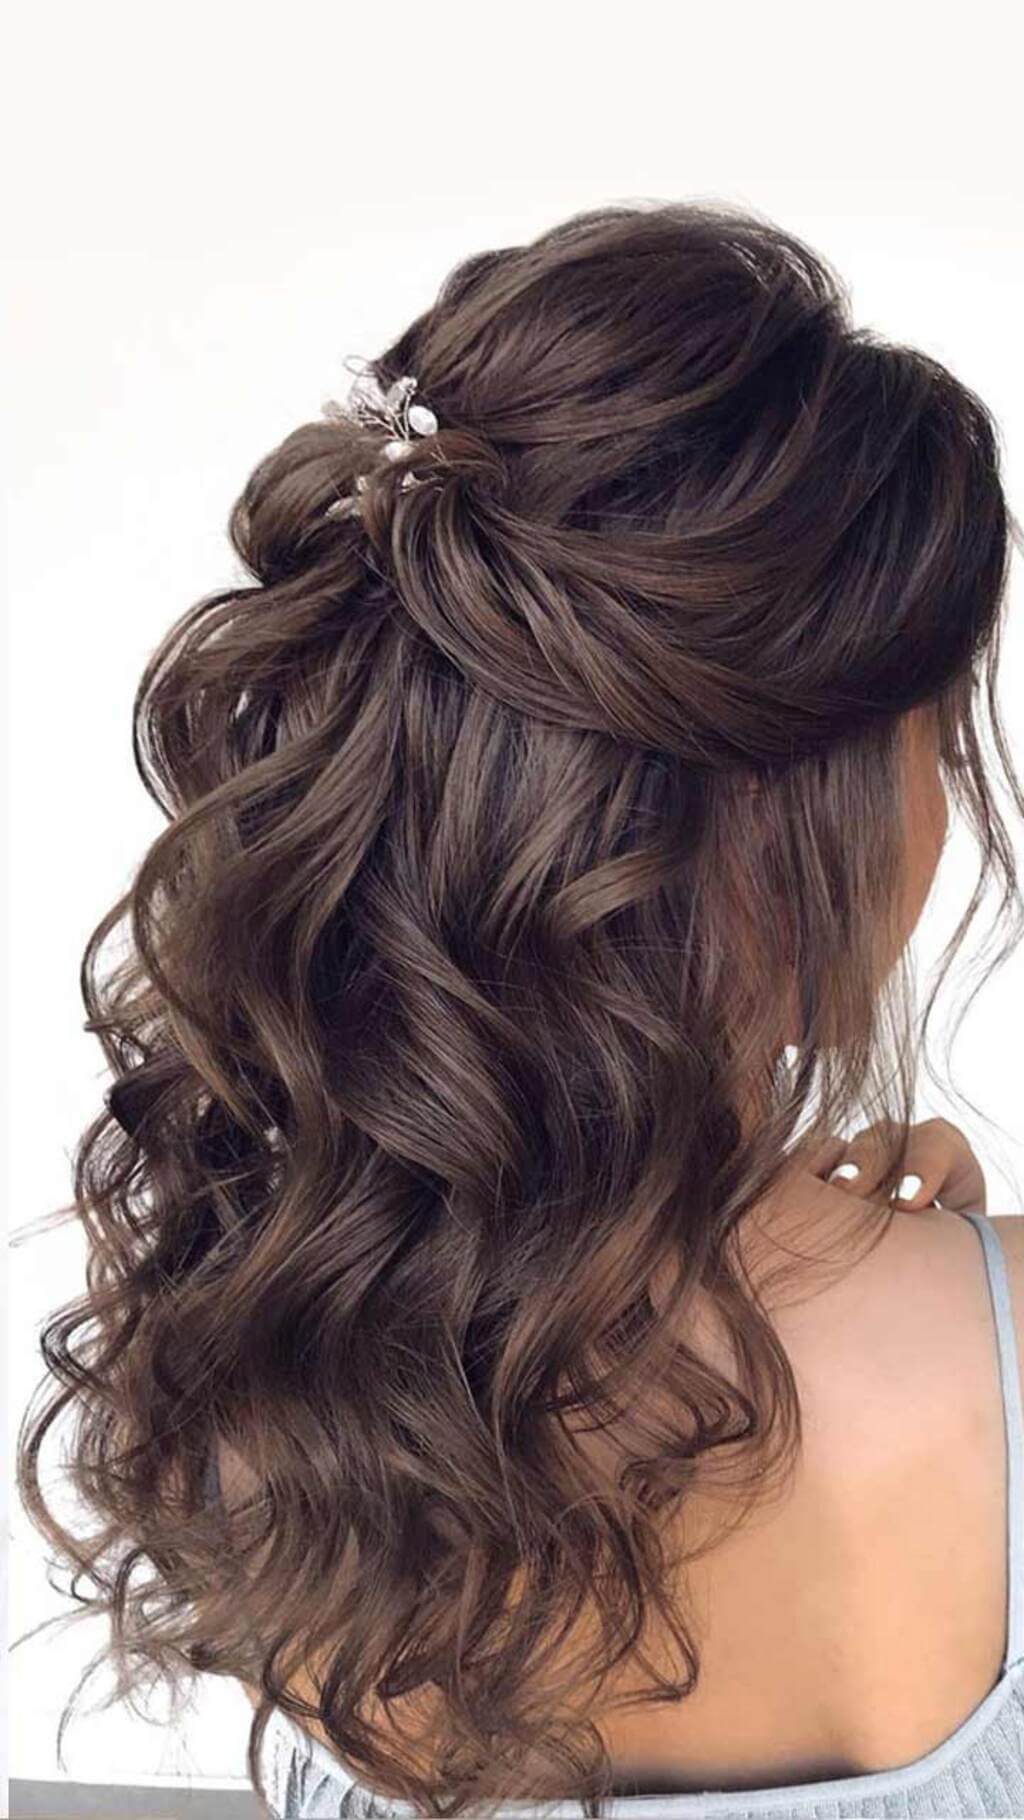 31 Mesmerizing Half Up Half Down Hairstyles to Try in 2023